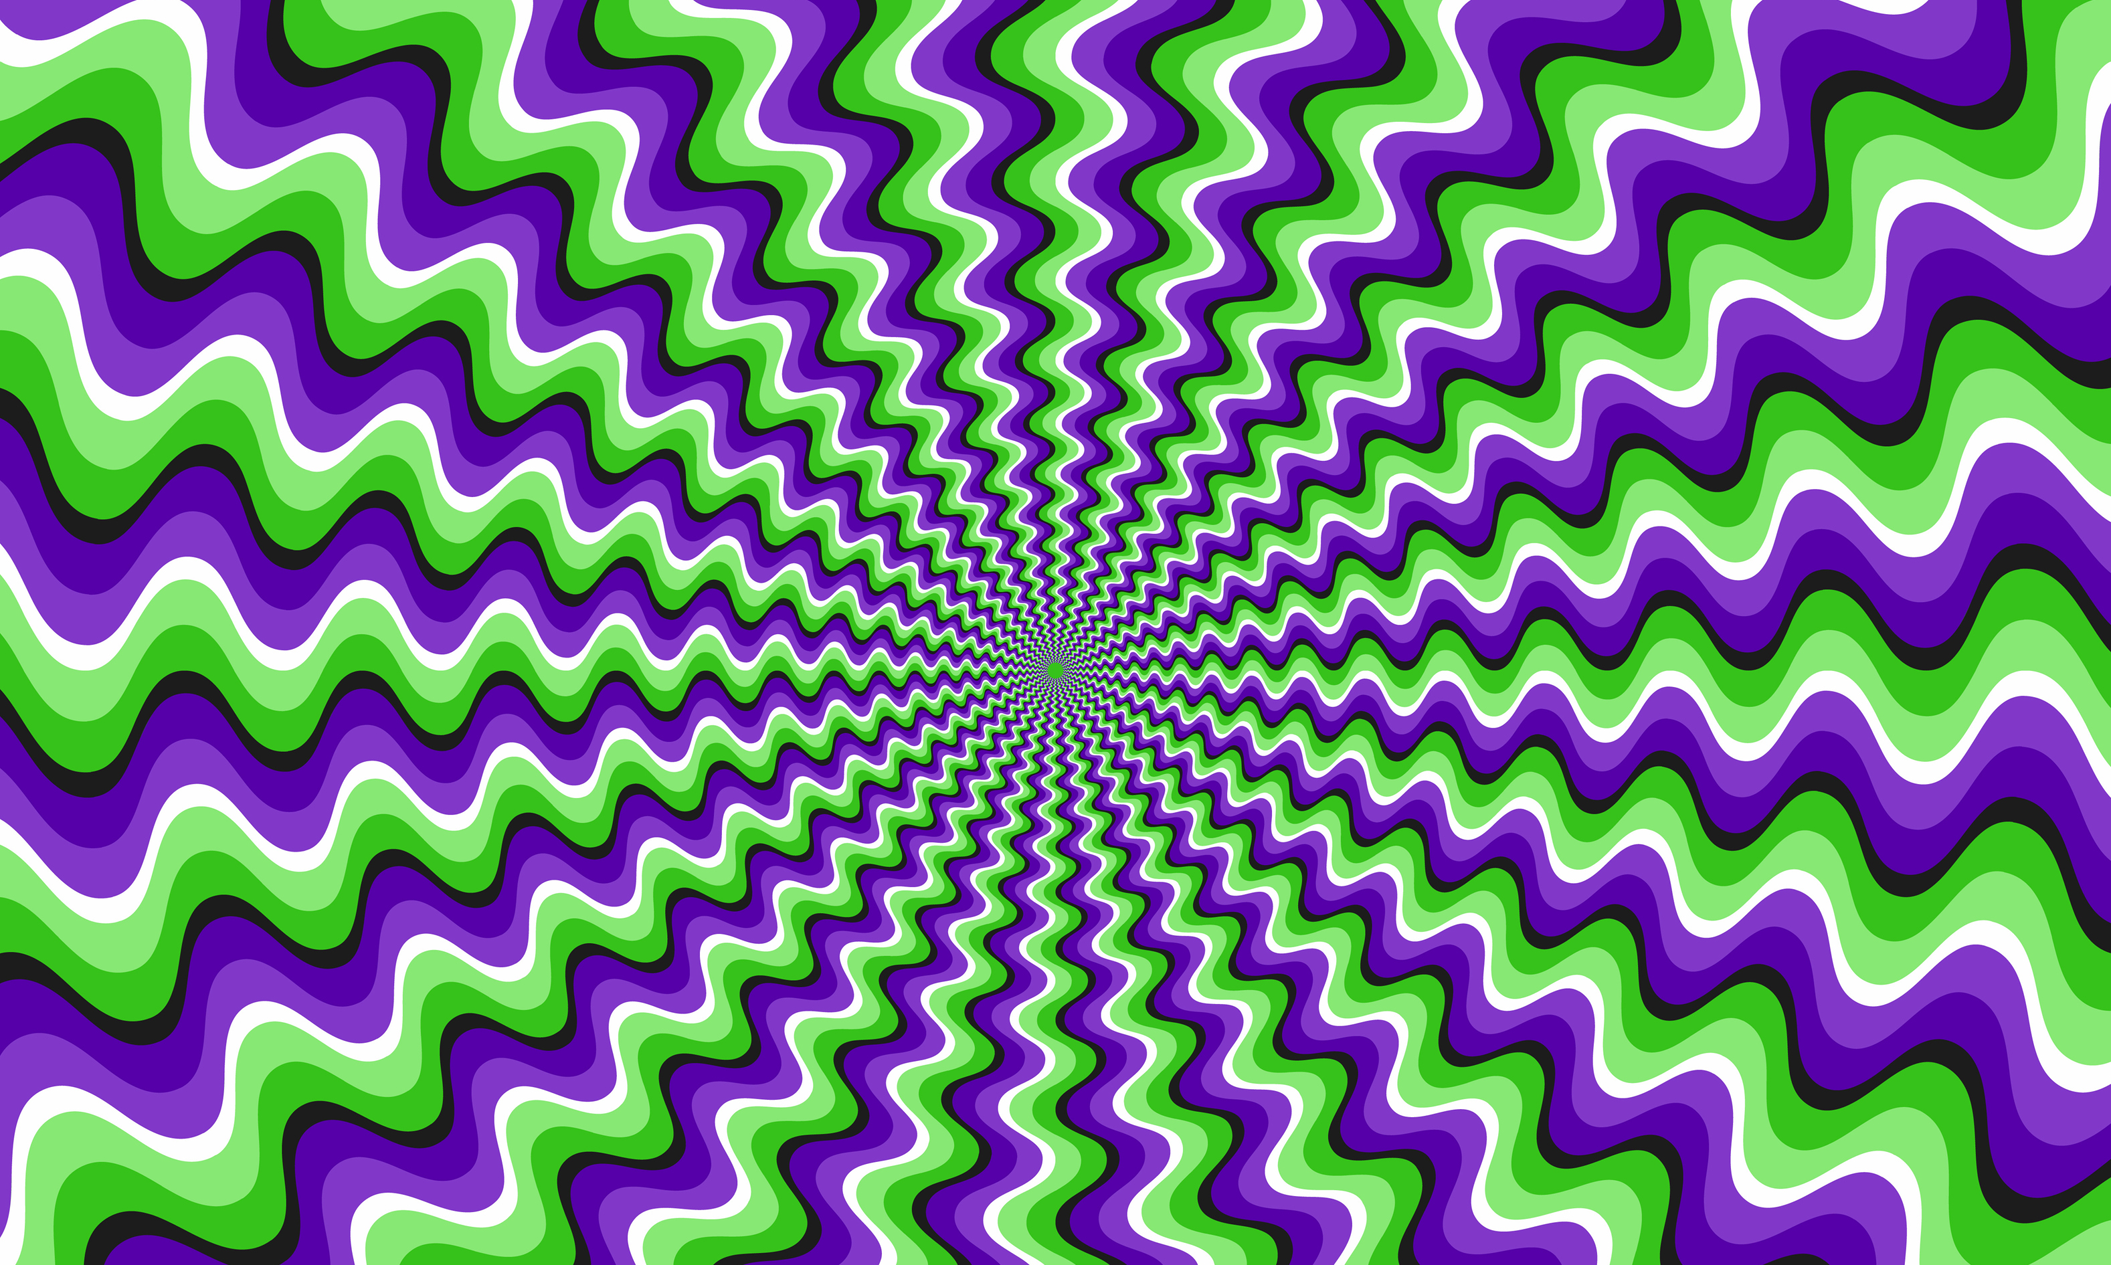 Tik Toker Blows Millions Of Minds With Optical Illusions And Tutorials